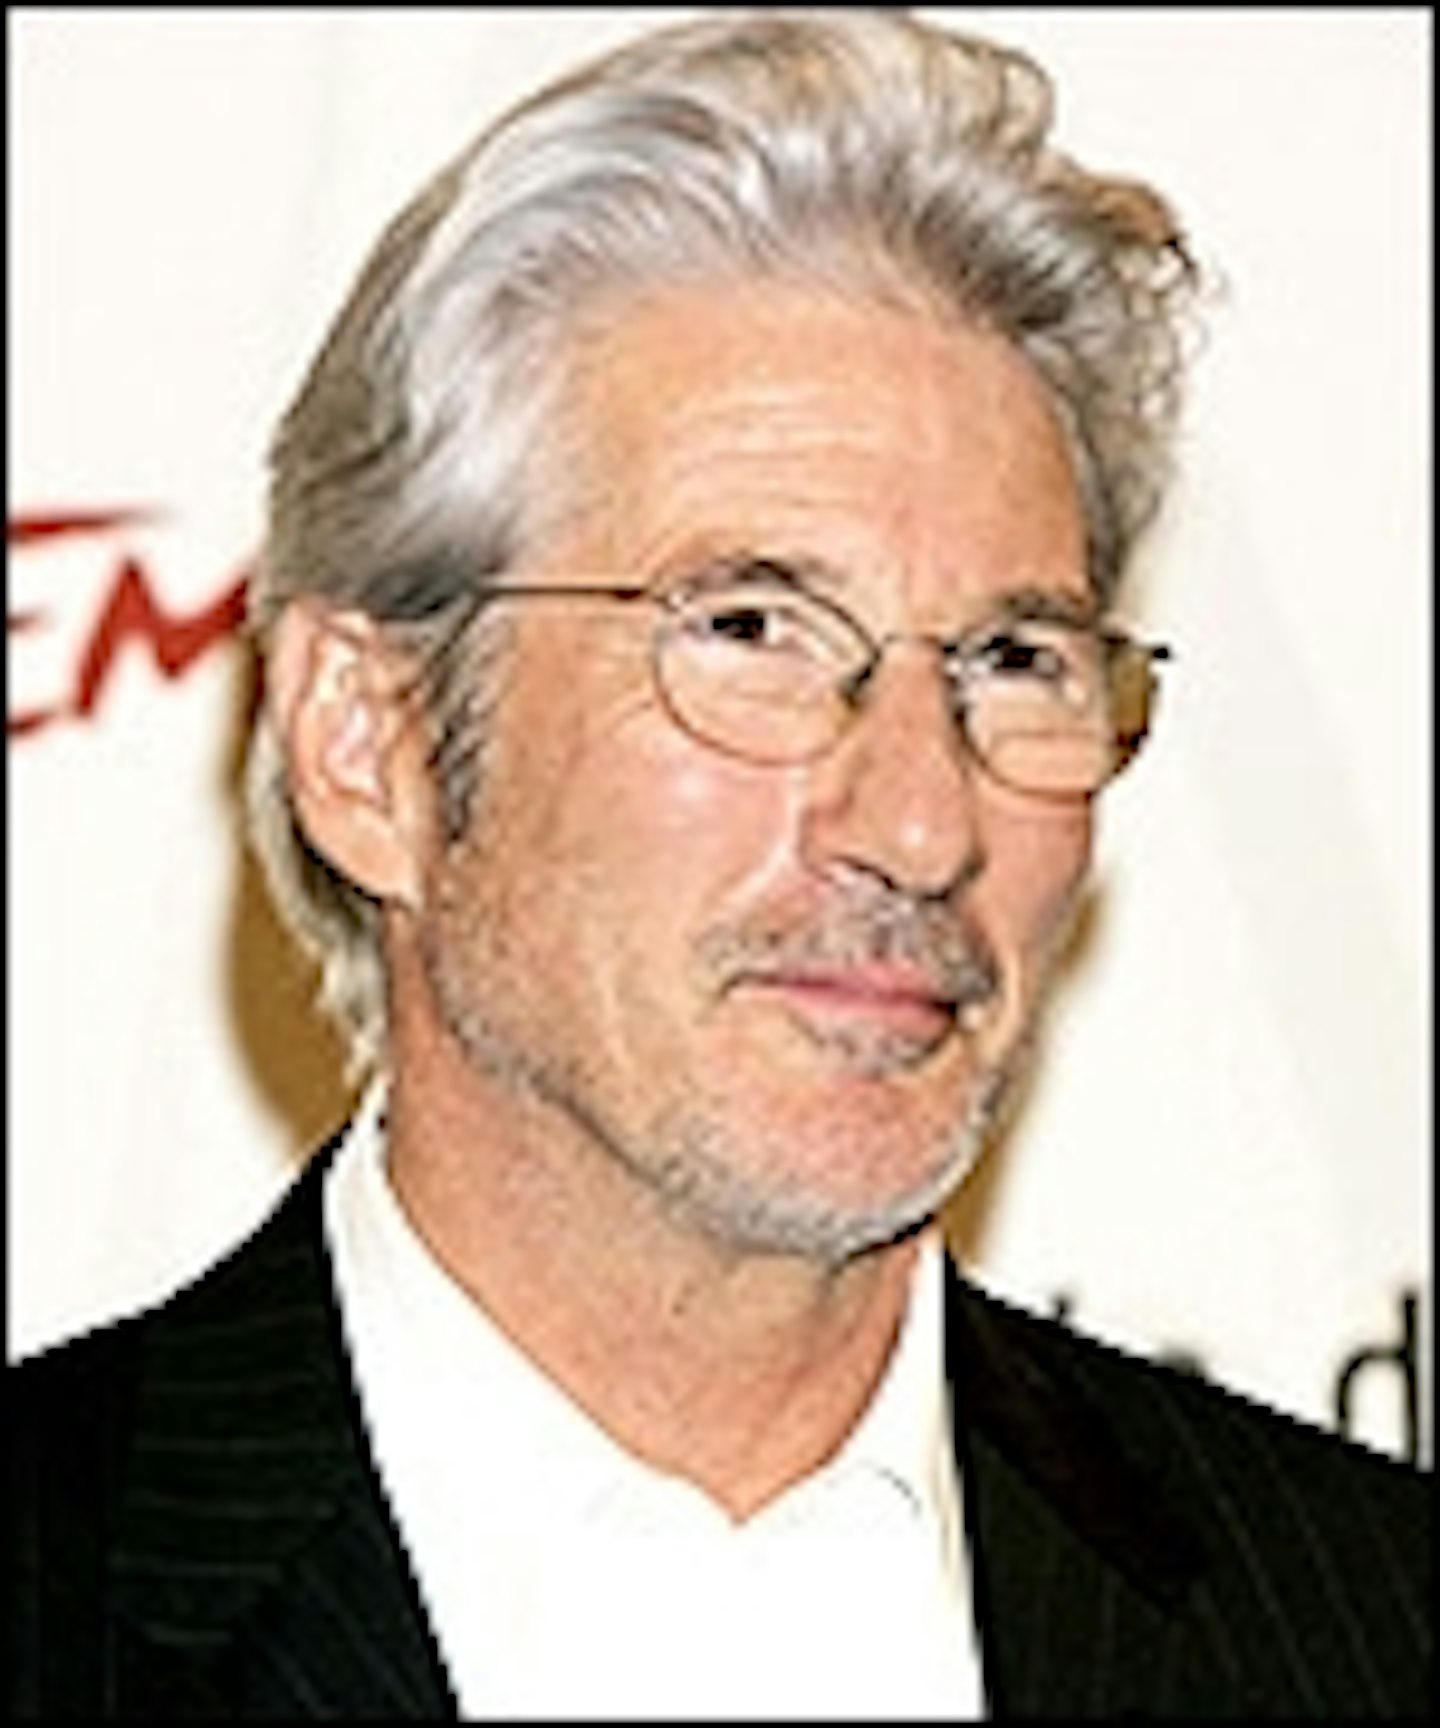 Richard Gere Lines Up Two Projects